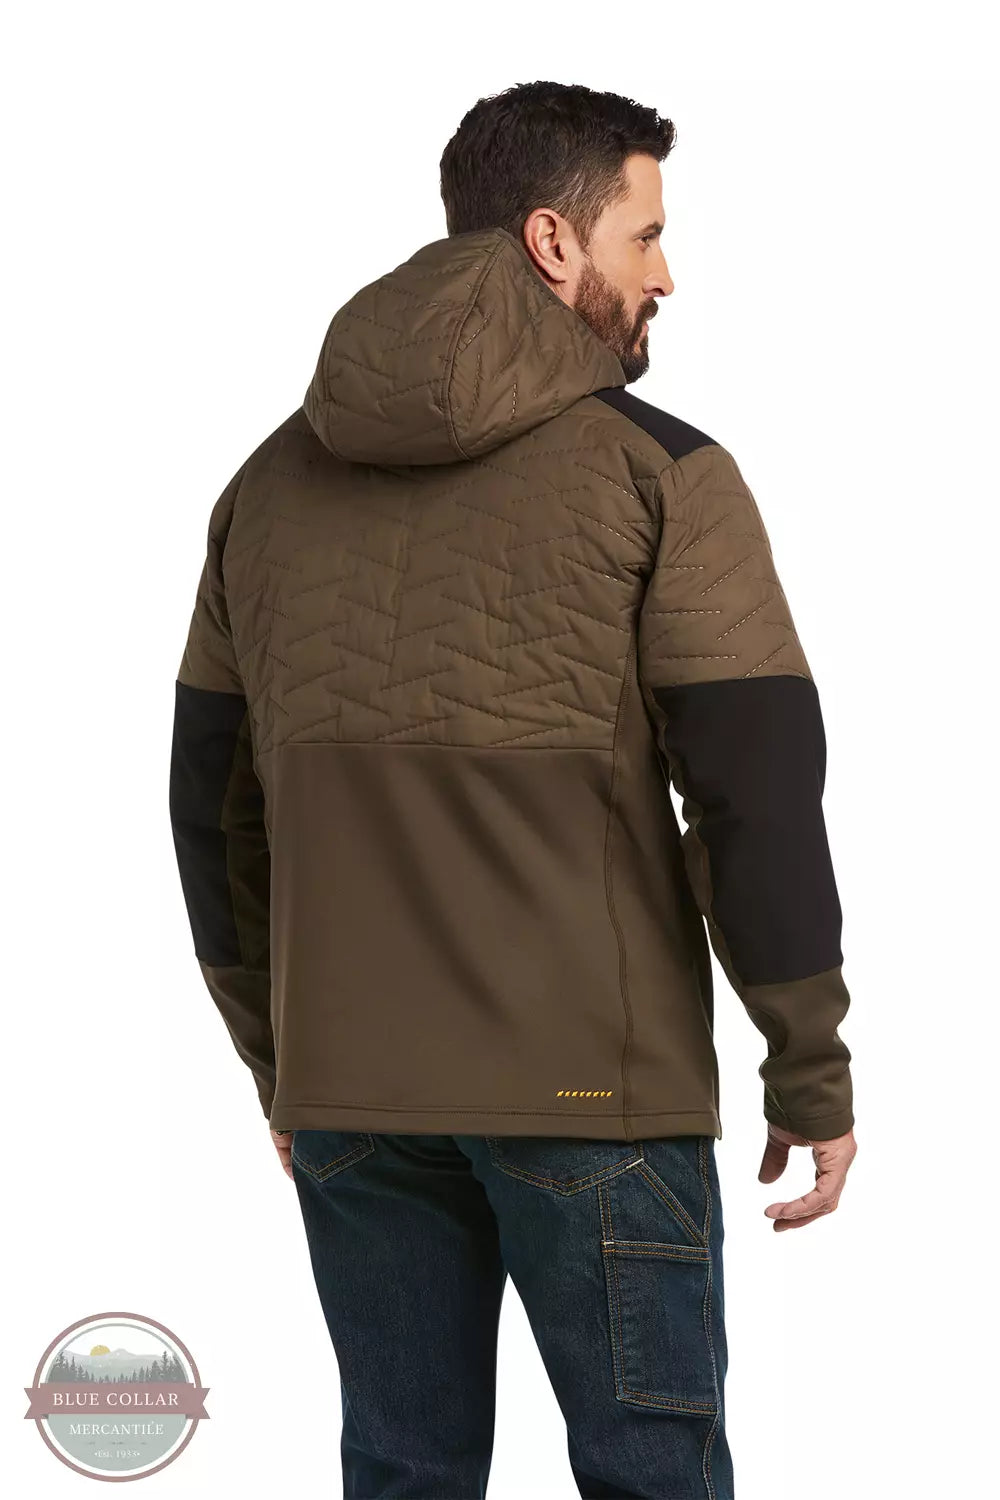 Ariat 10037510 Rebar Cloud 9 Insulated Jacket in Wren Back View